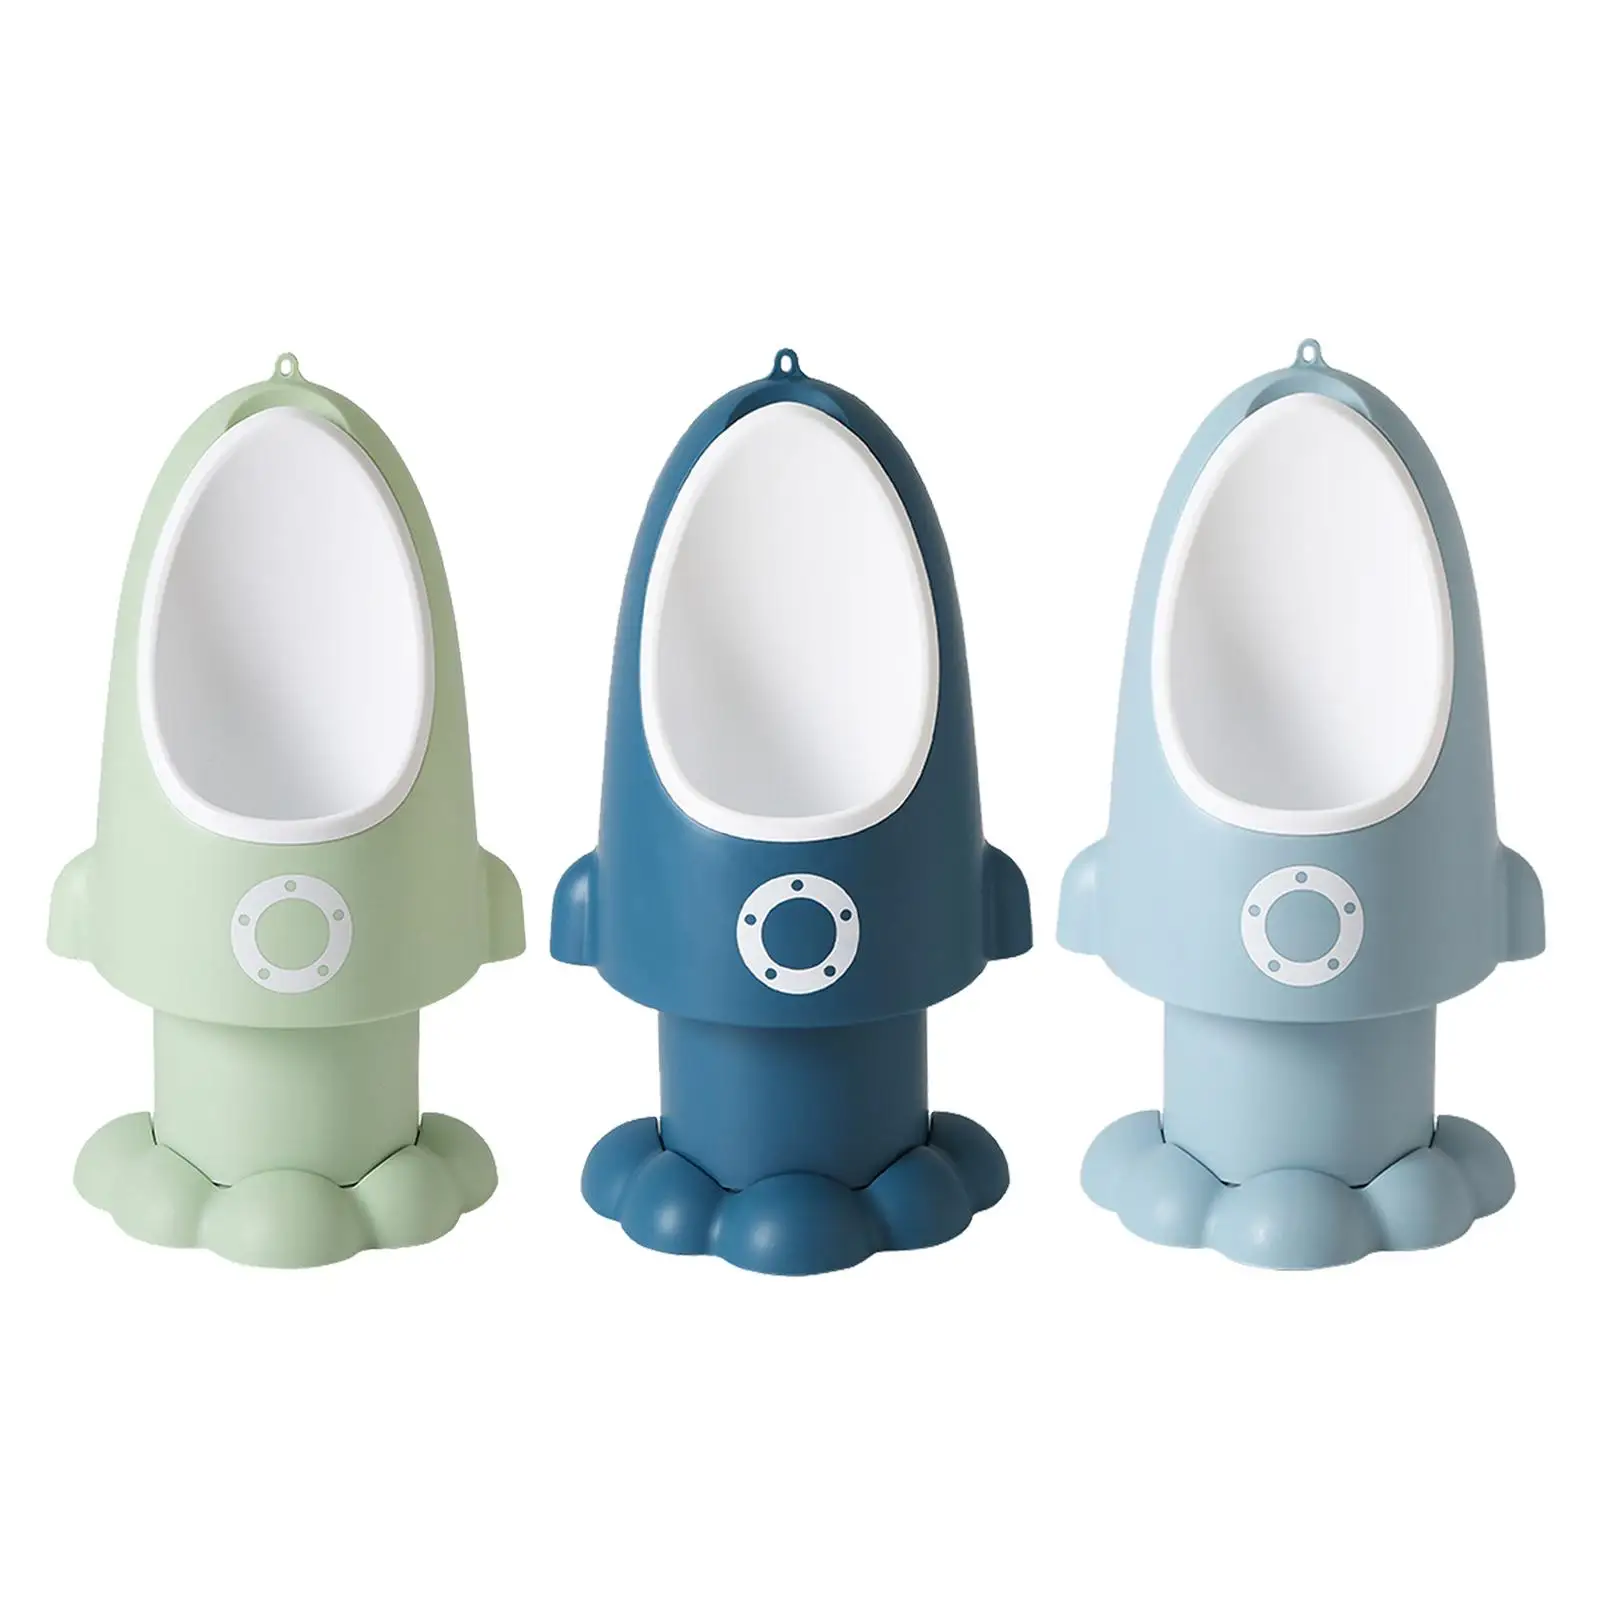 Wall Mounted Training Urinal Hanging Pee Trainer Pee Training for Children